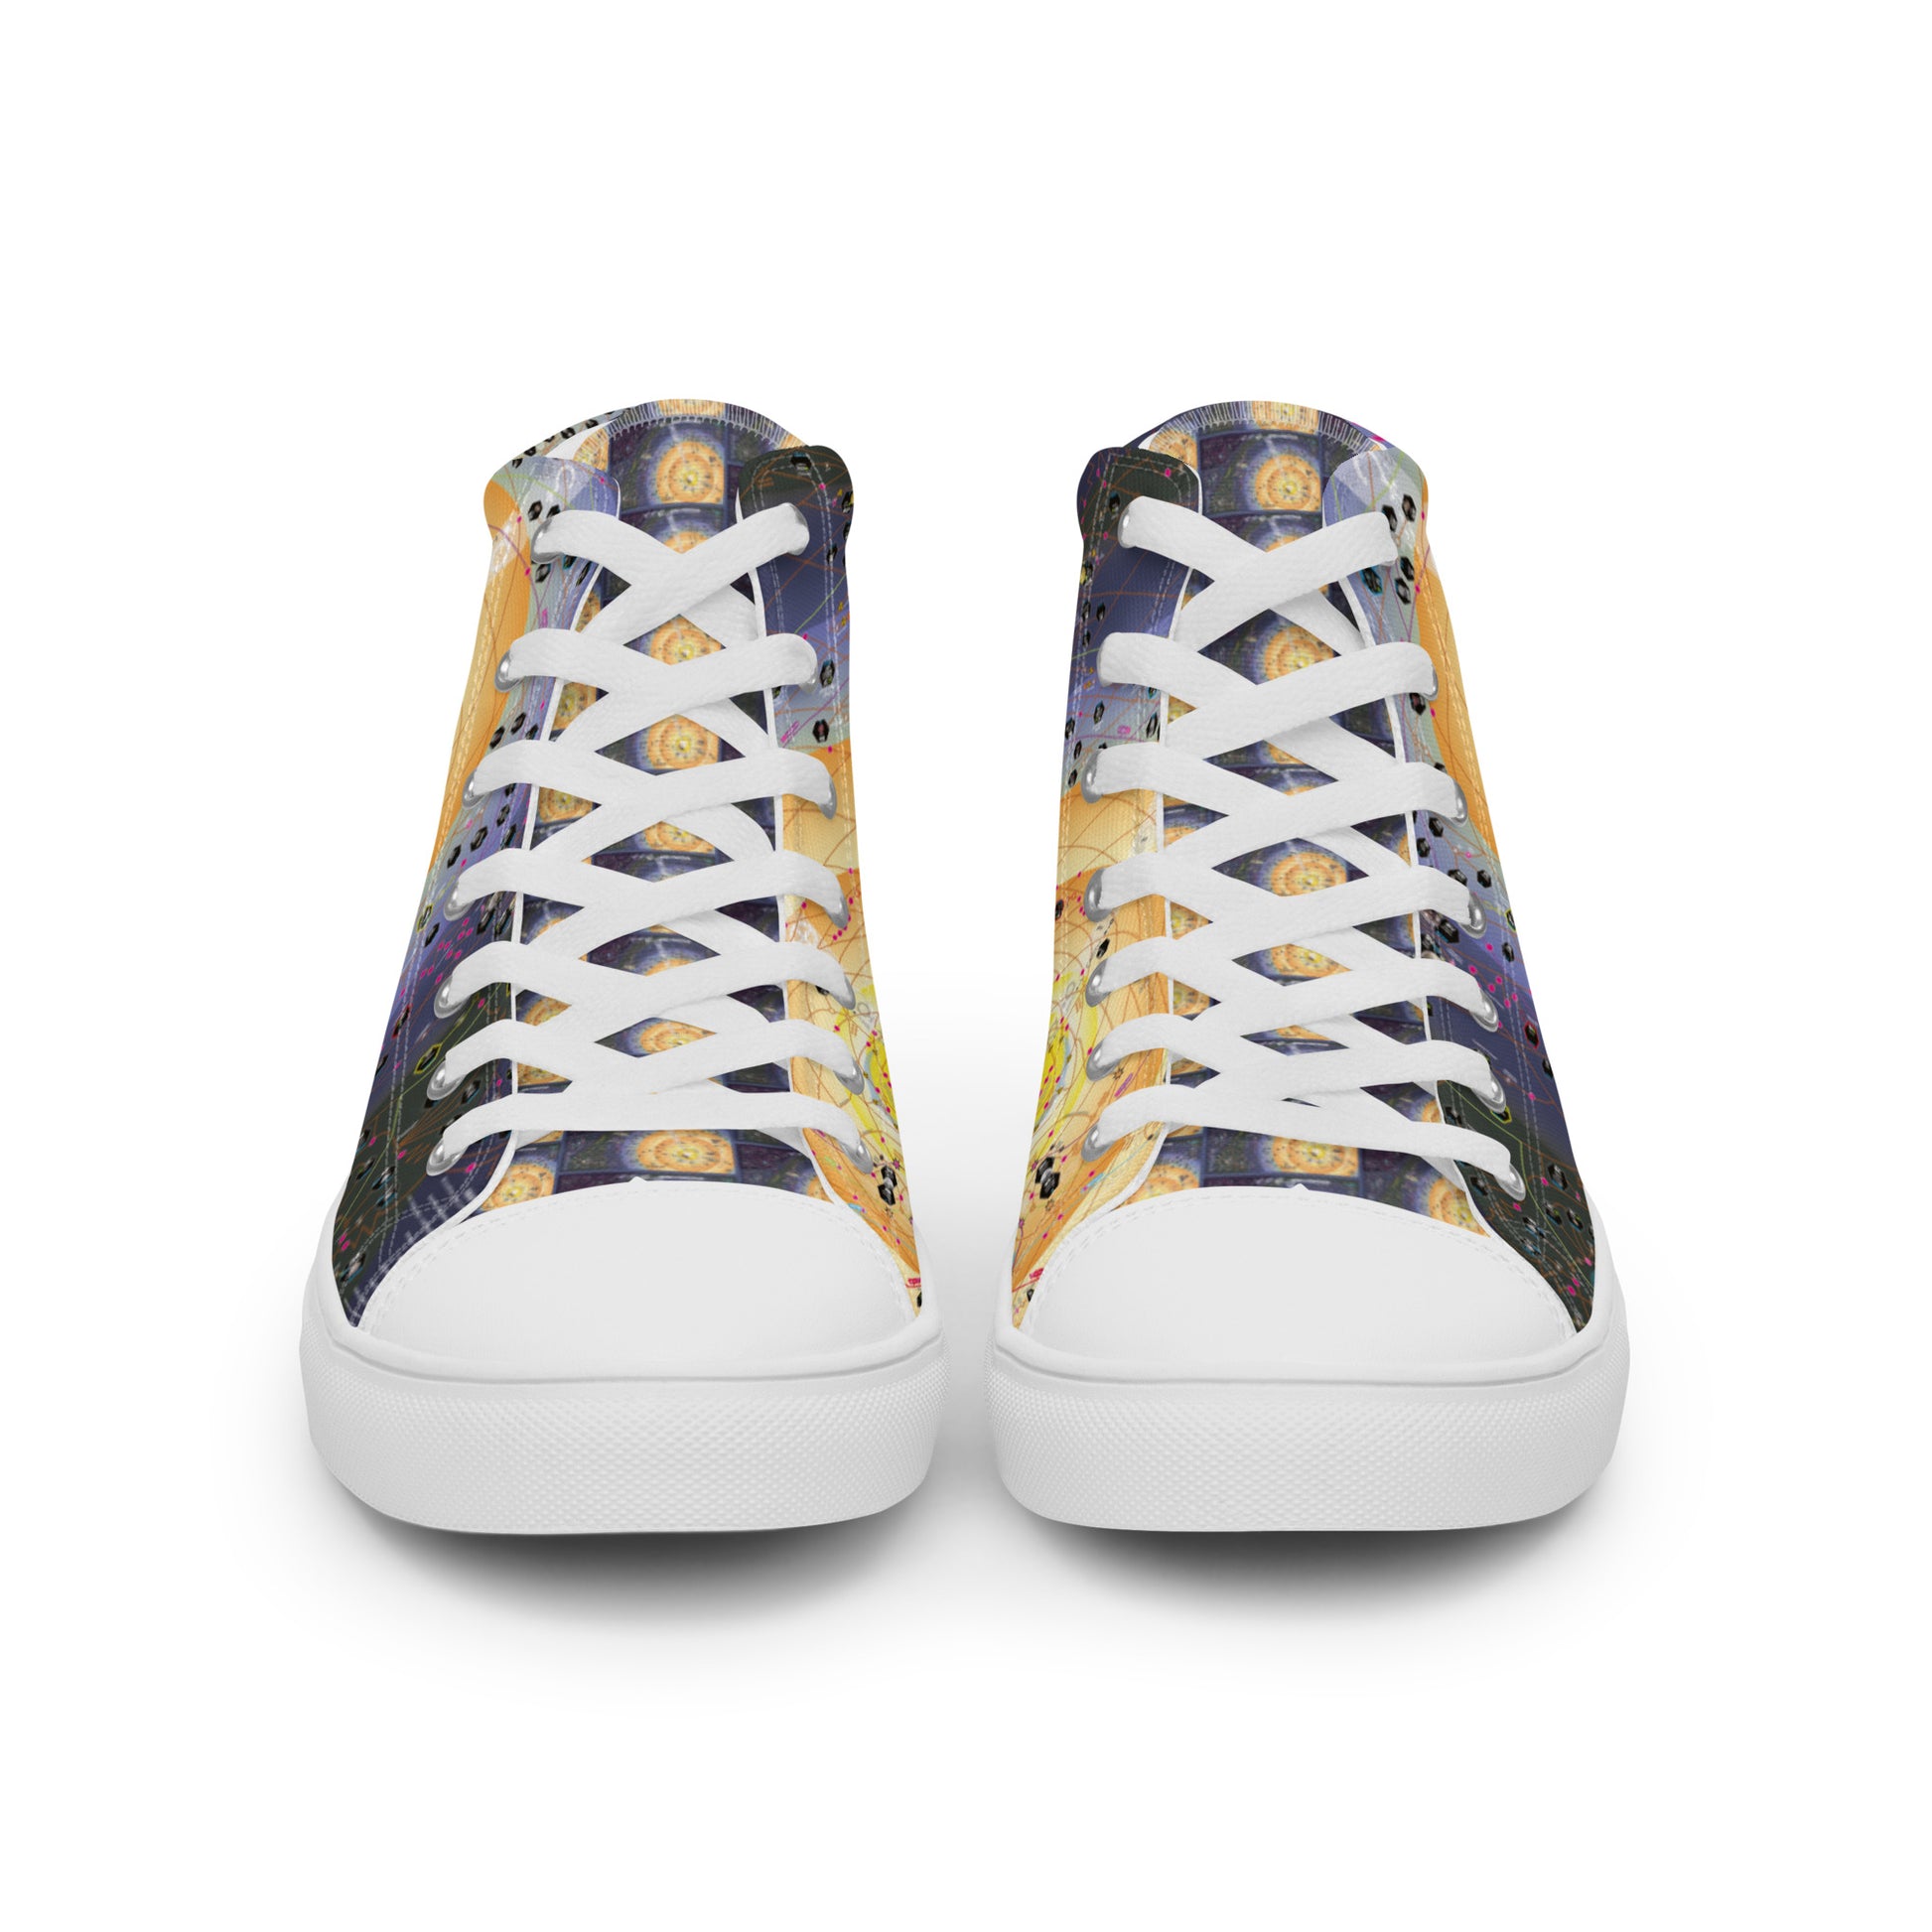 Men’s High Top Canvas Shoe — Coalition Strength & Conditioning